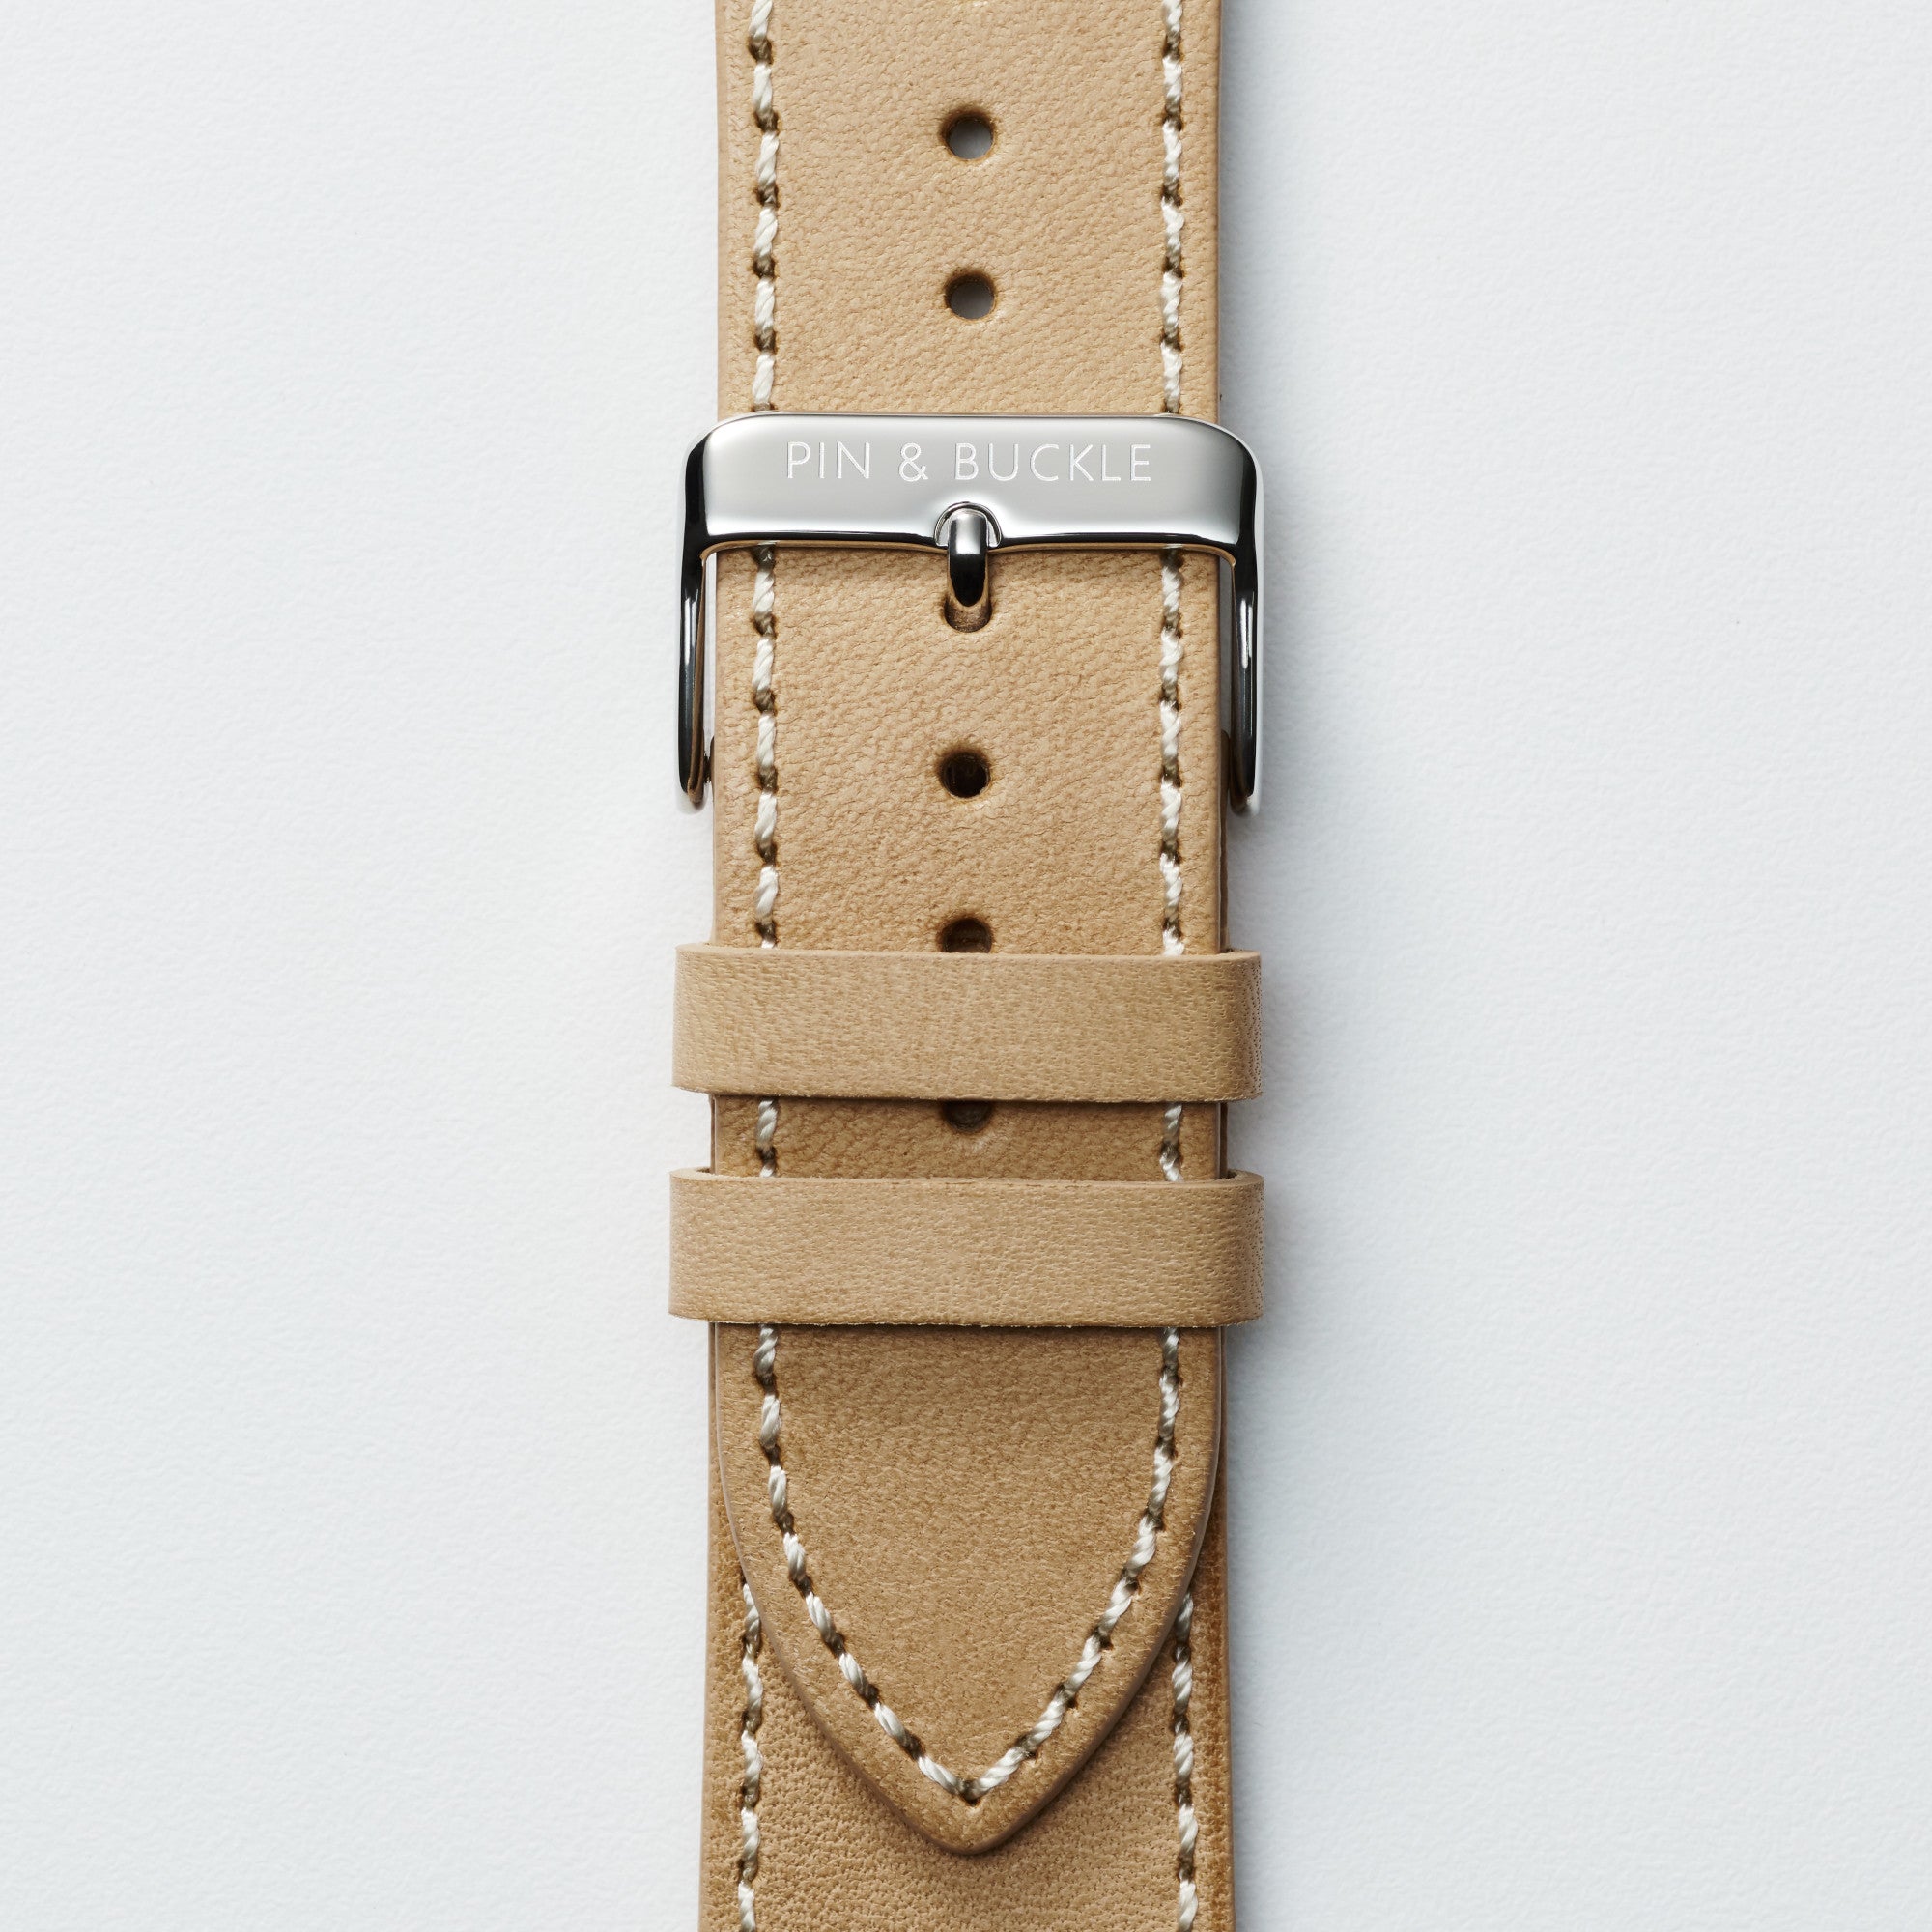 Vachetta Leather Apple Watch Band by Pin & Buckle - Patina Day 1